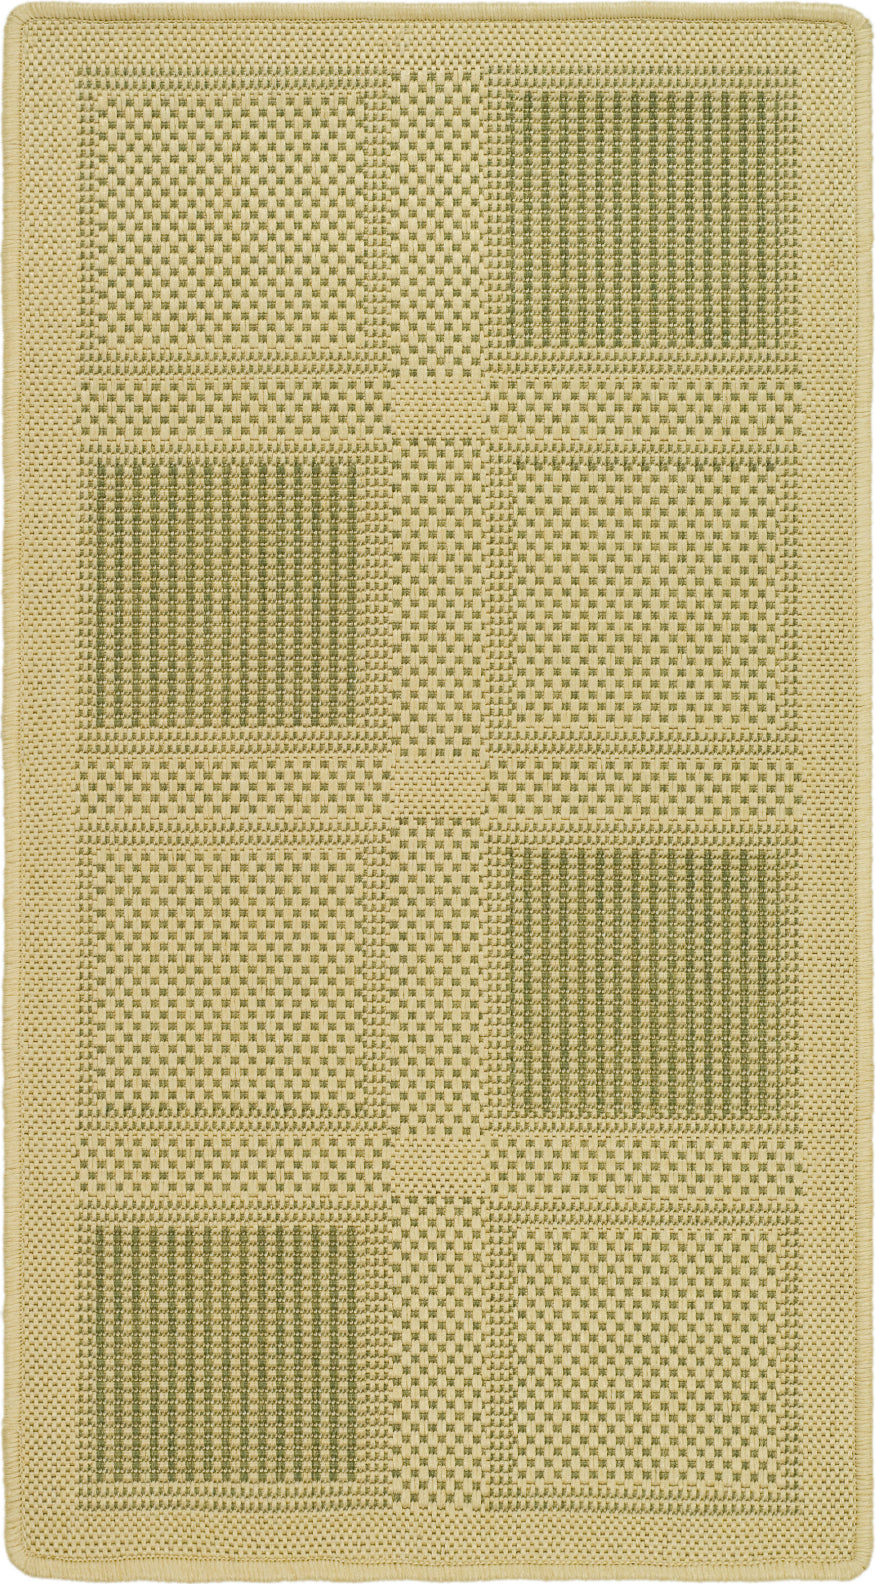 Safavieh Courtyard CY1928 Natural/Olive Area Rug main image